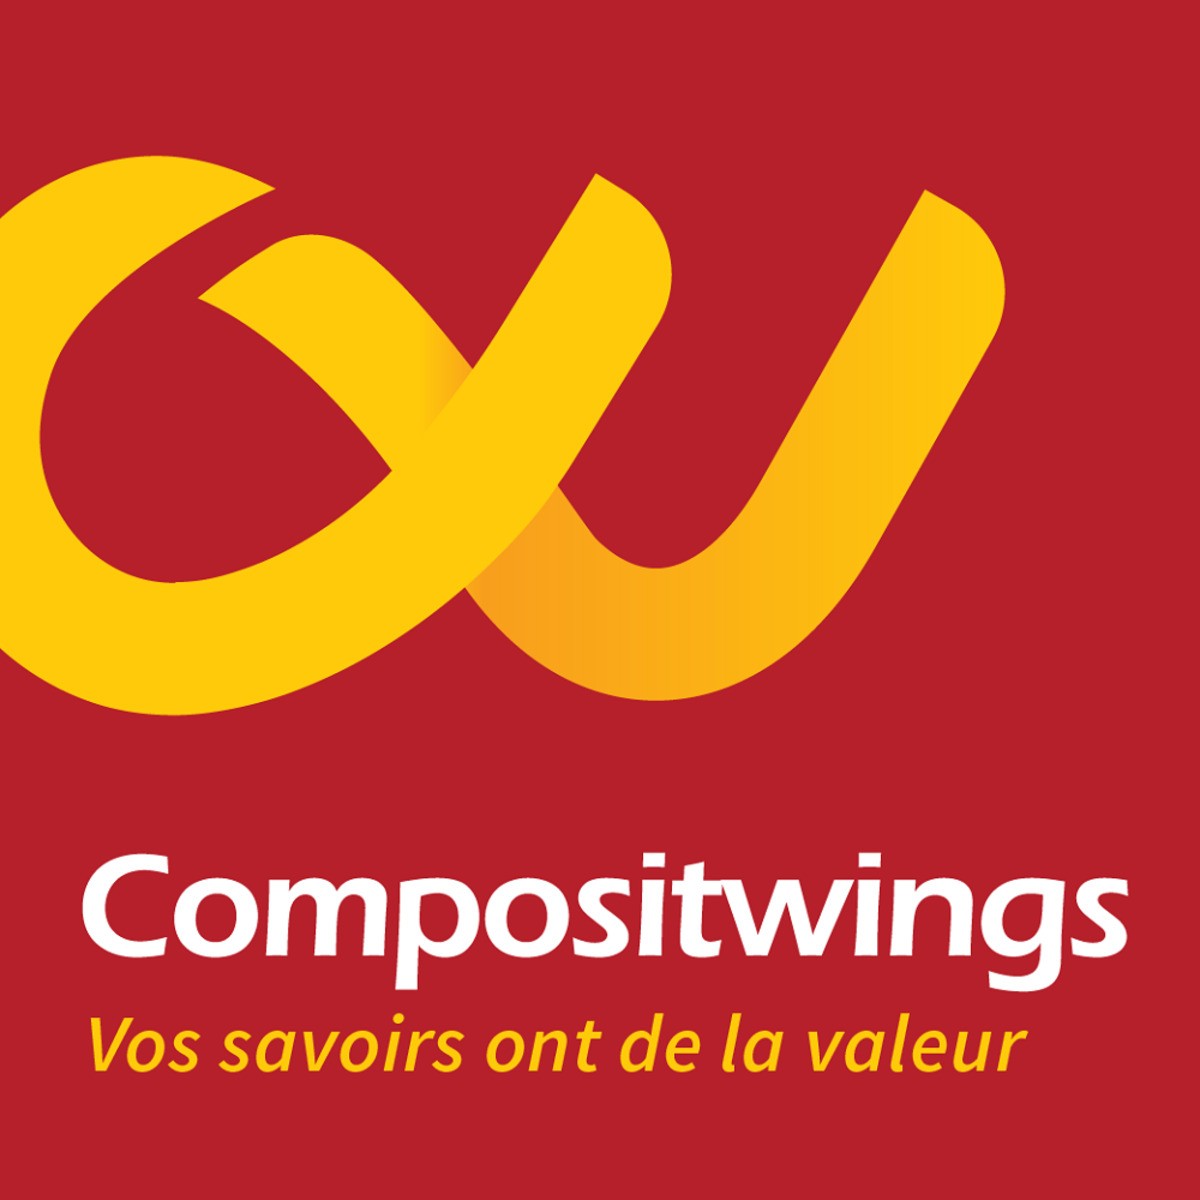 COMPOSITWINGS